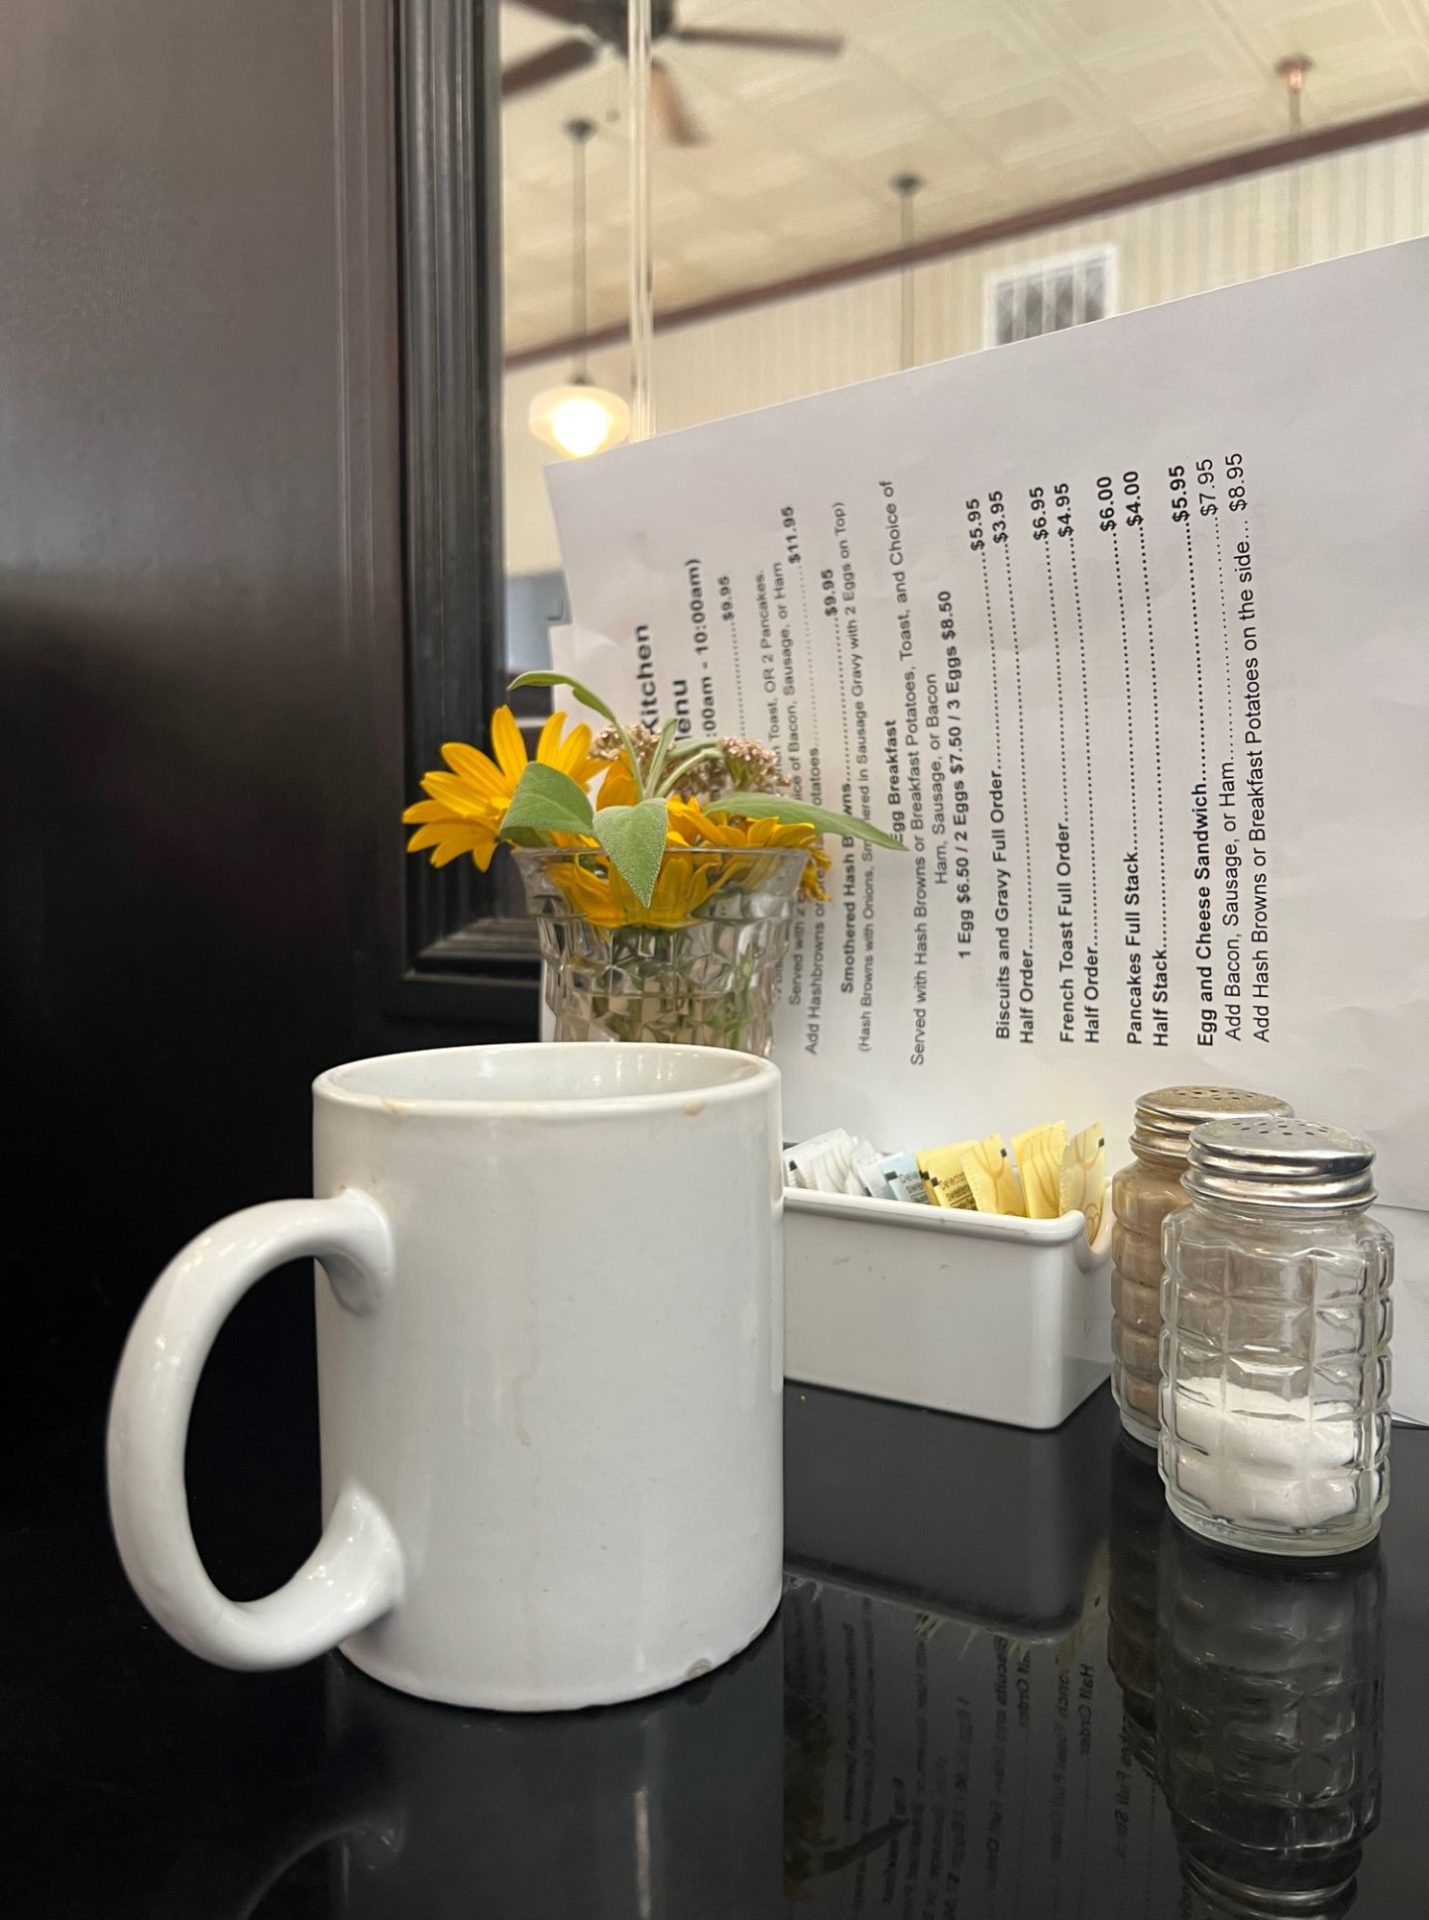 A white coffee mug sits on a dark brown table, alongside a vase of yellow flowers, a container of sugar packets, salt and pepper shakers, and white paper menus.